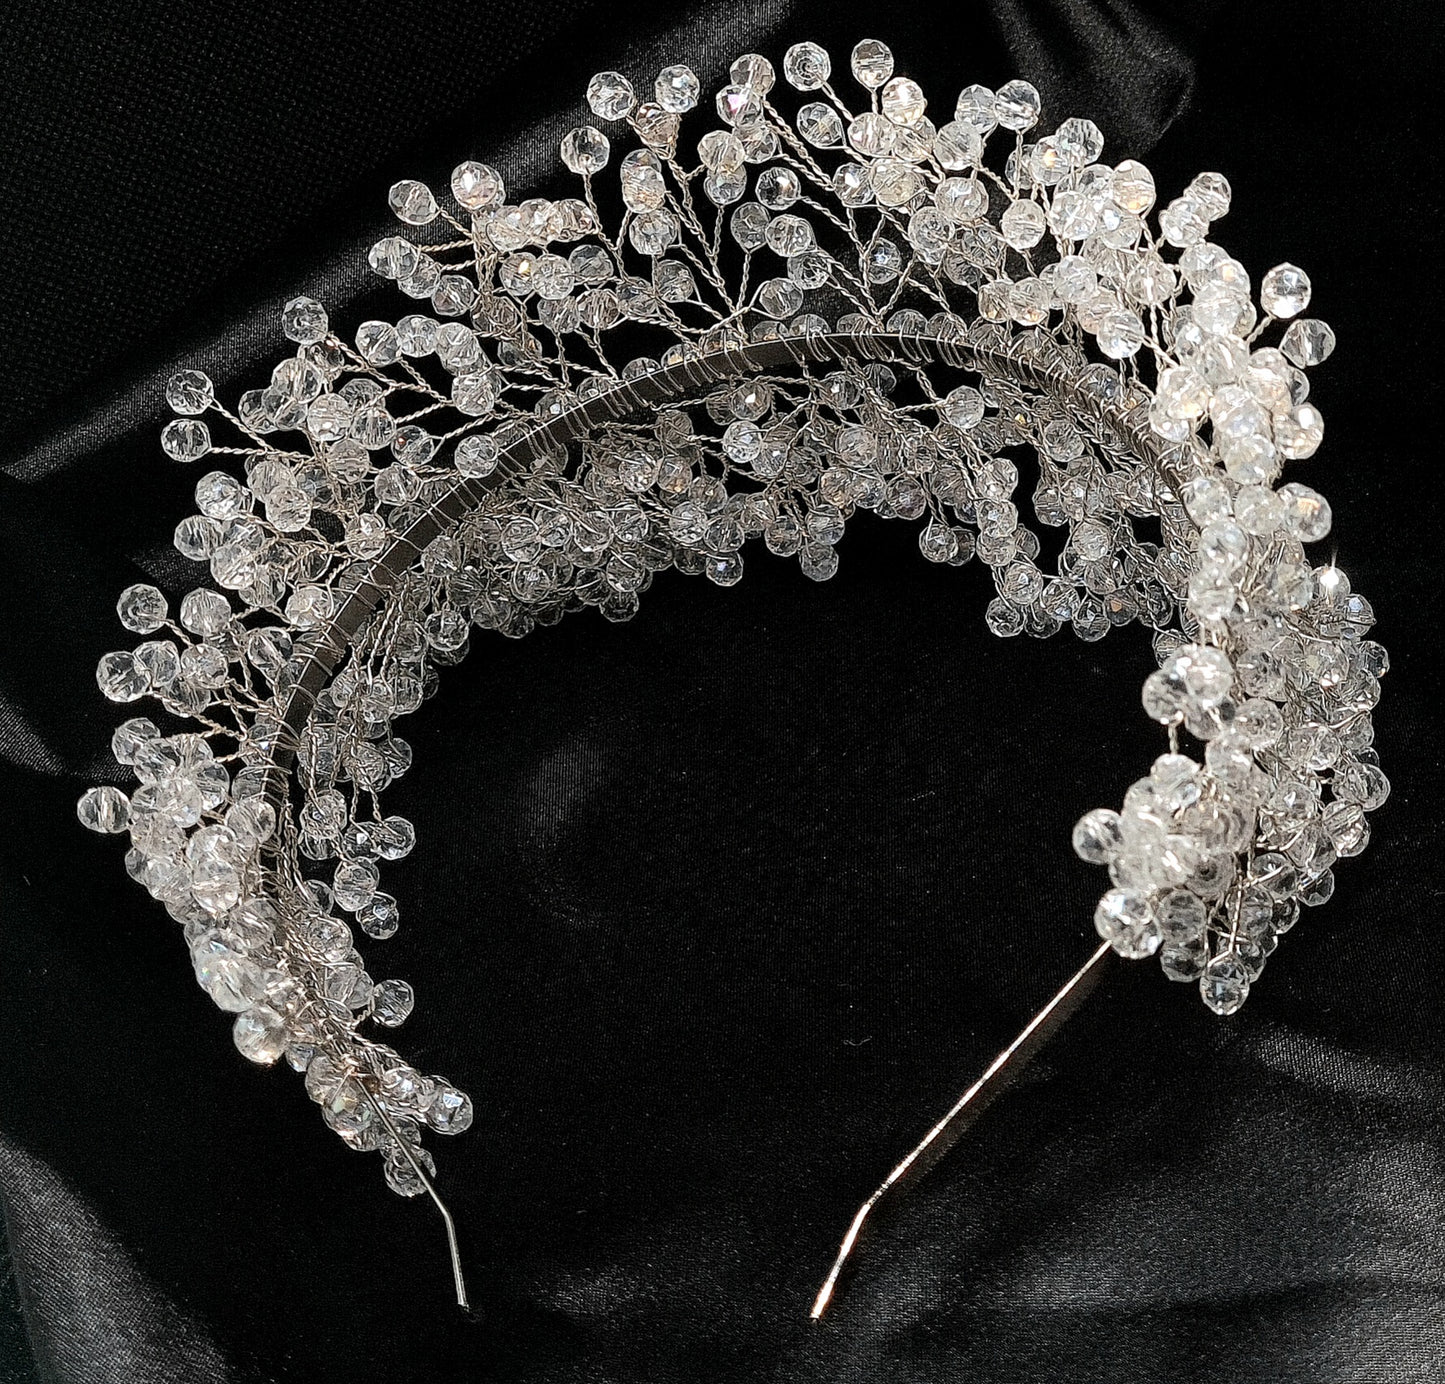 a bridal hair piece on a black background. The hair piece is made of pearls and crystals, and it has a delicate, feminine design. It is perfect for a bride who wants to add a touch of elegance to her wedding day look. The hair piece is shown on a black background, so the pearls and crystals stand out beautifully.